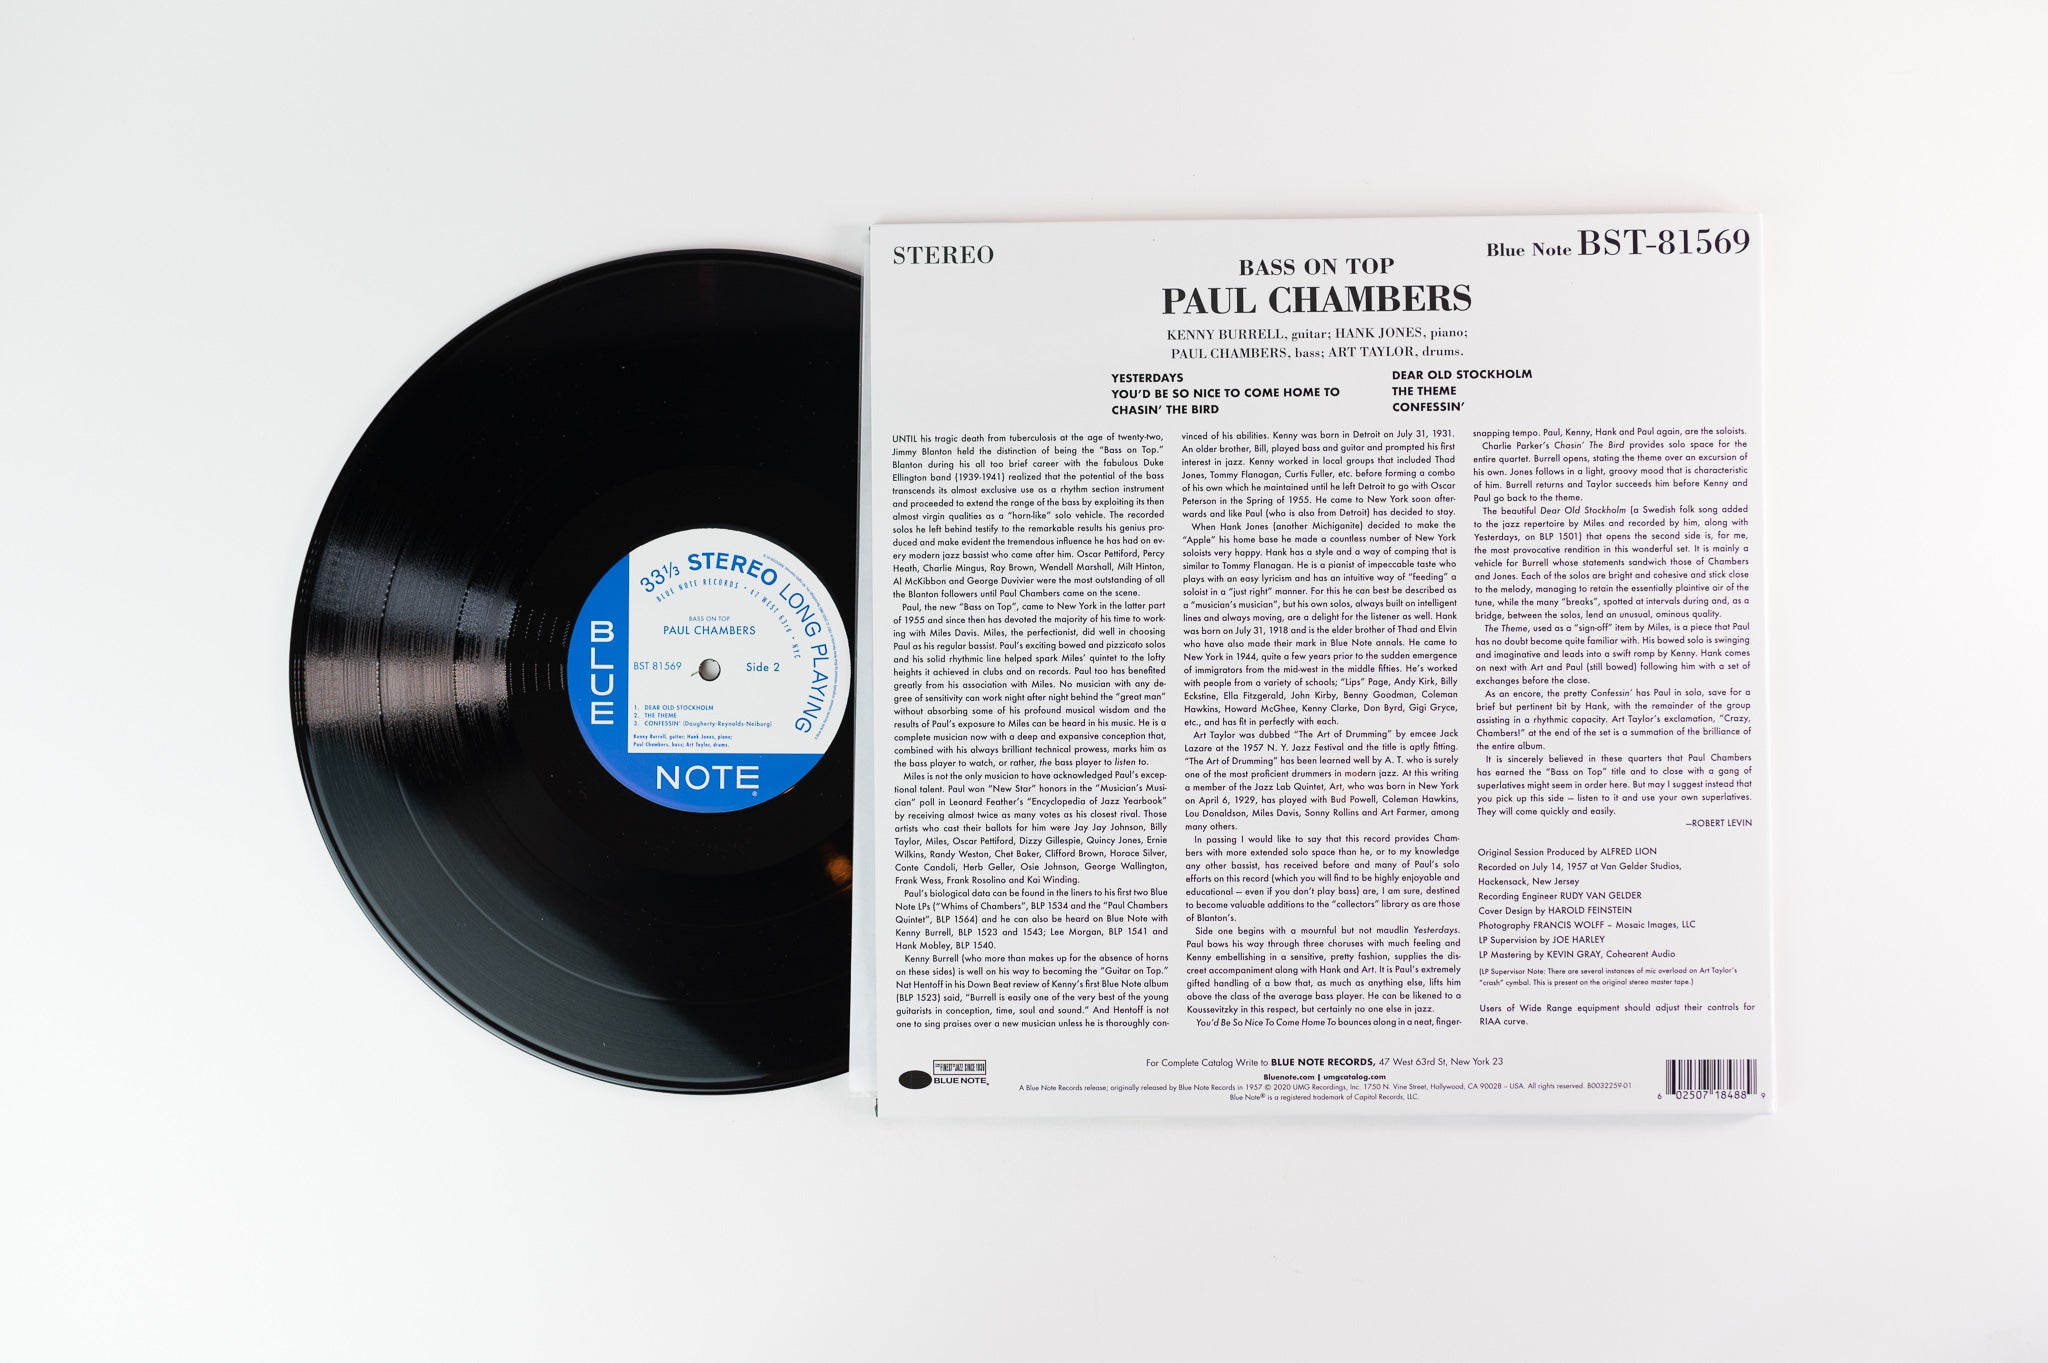 Paul Chambers Quartet - Bass On Top on Blue Note Tone Poet Series